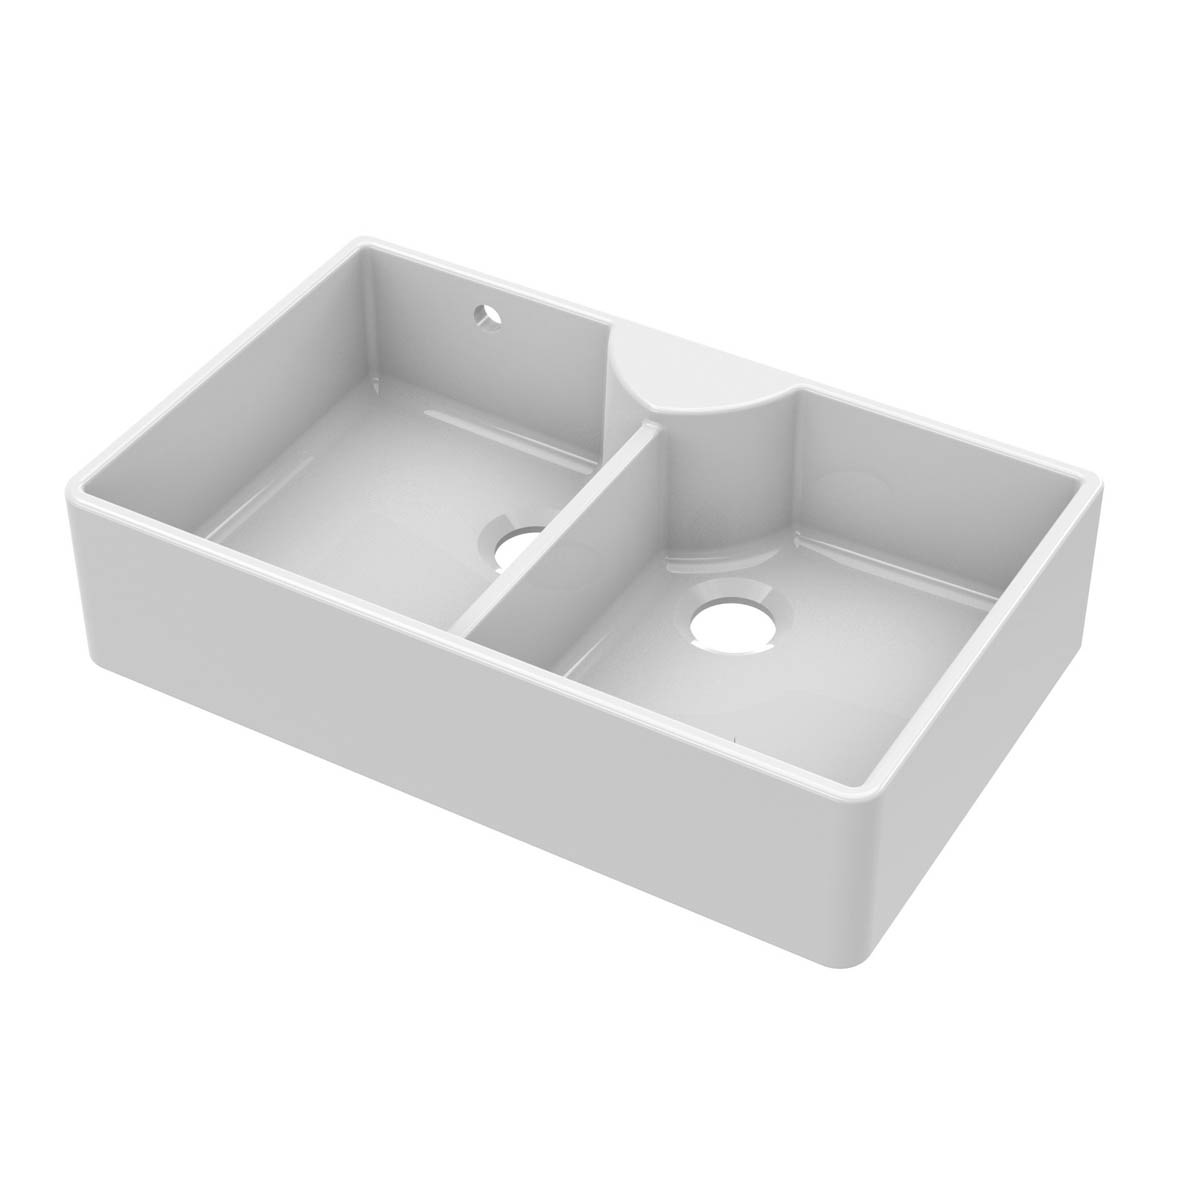 Nuie Butler Double Bowl 895x550x220mm Fireclay Sink with Stepped Weir, Tap Ledge & Overflow - White (20298)